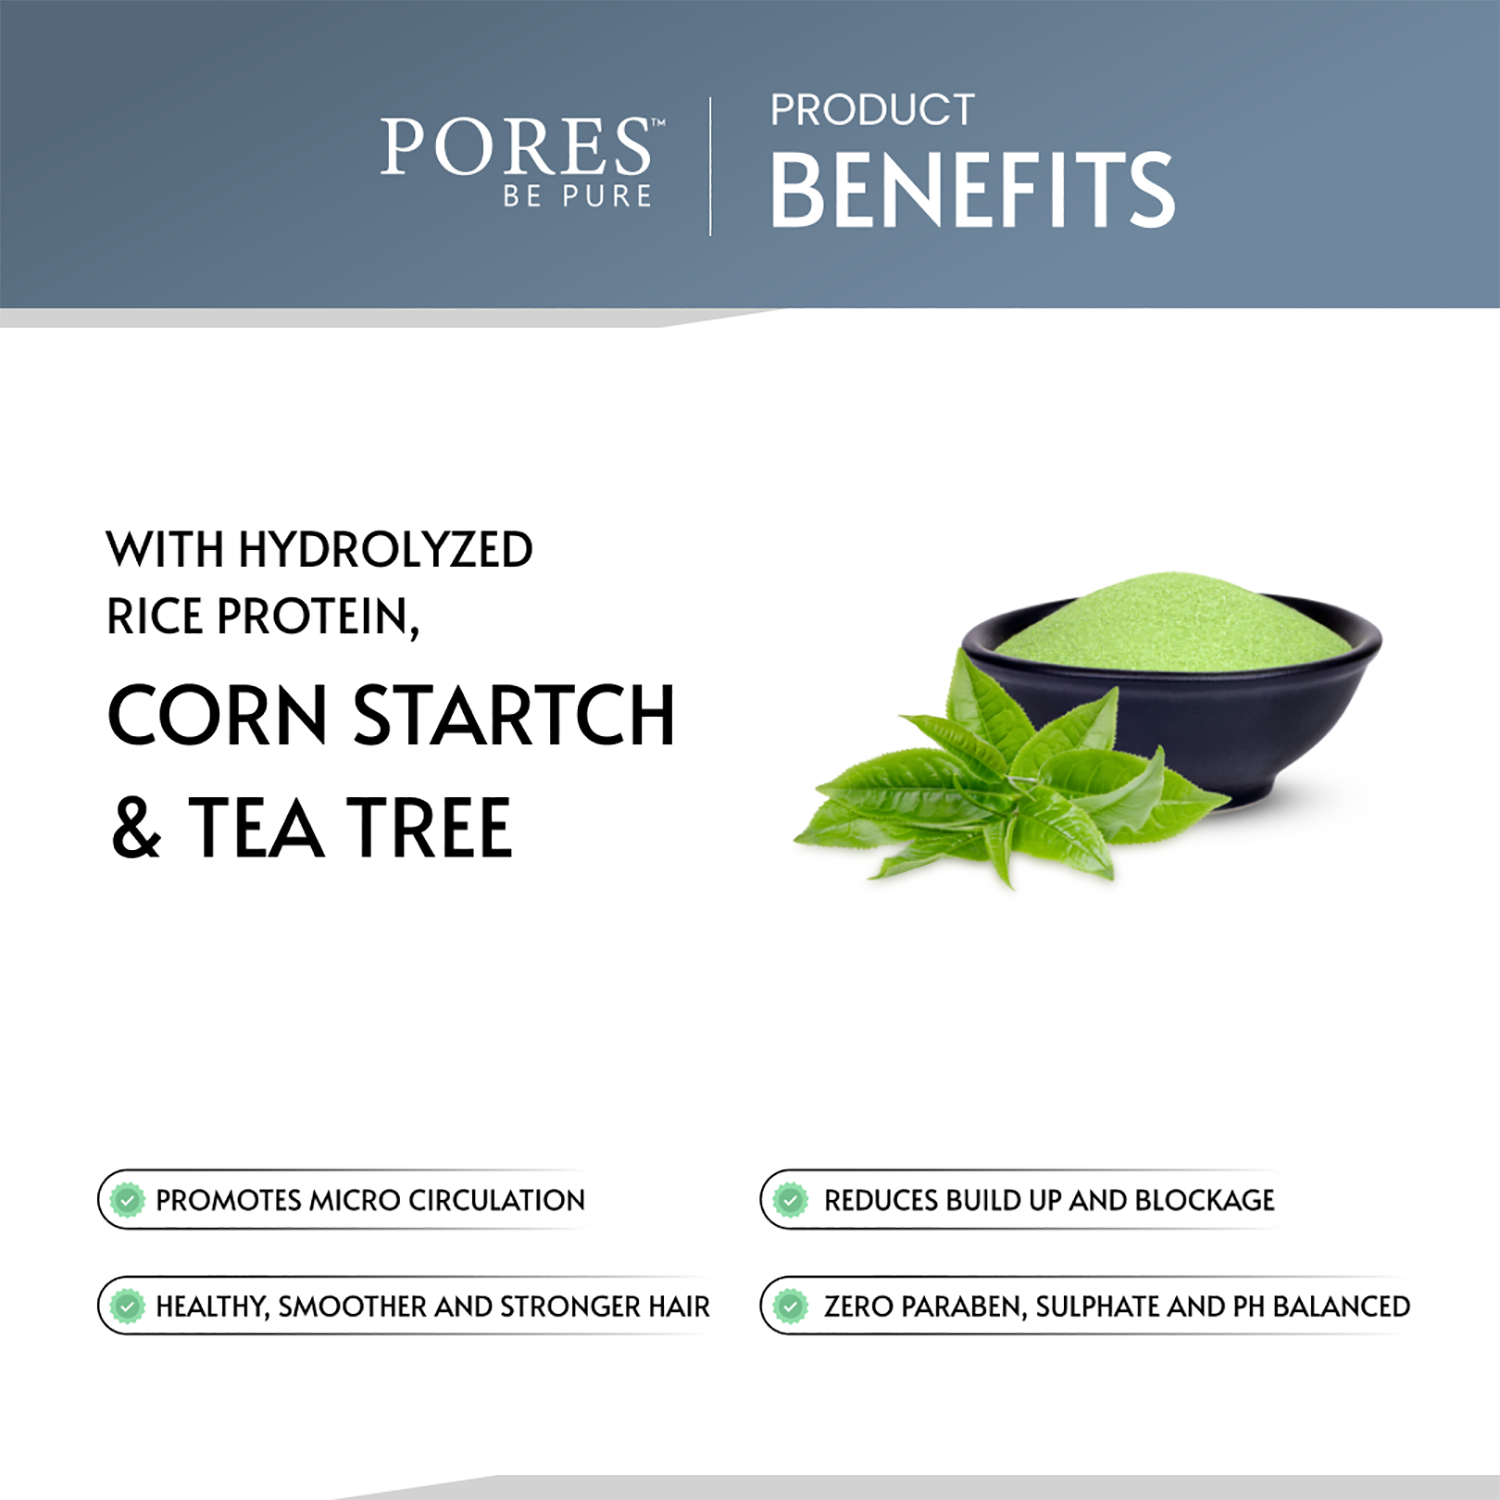 Benefits with Hydrolyzed rice protein, Corn starch & Tea tree by PORES BE PURE